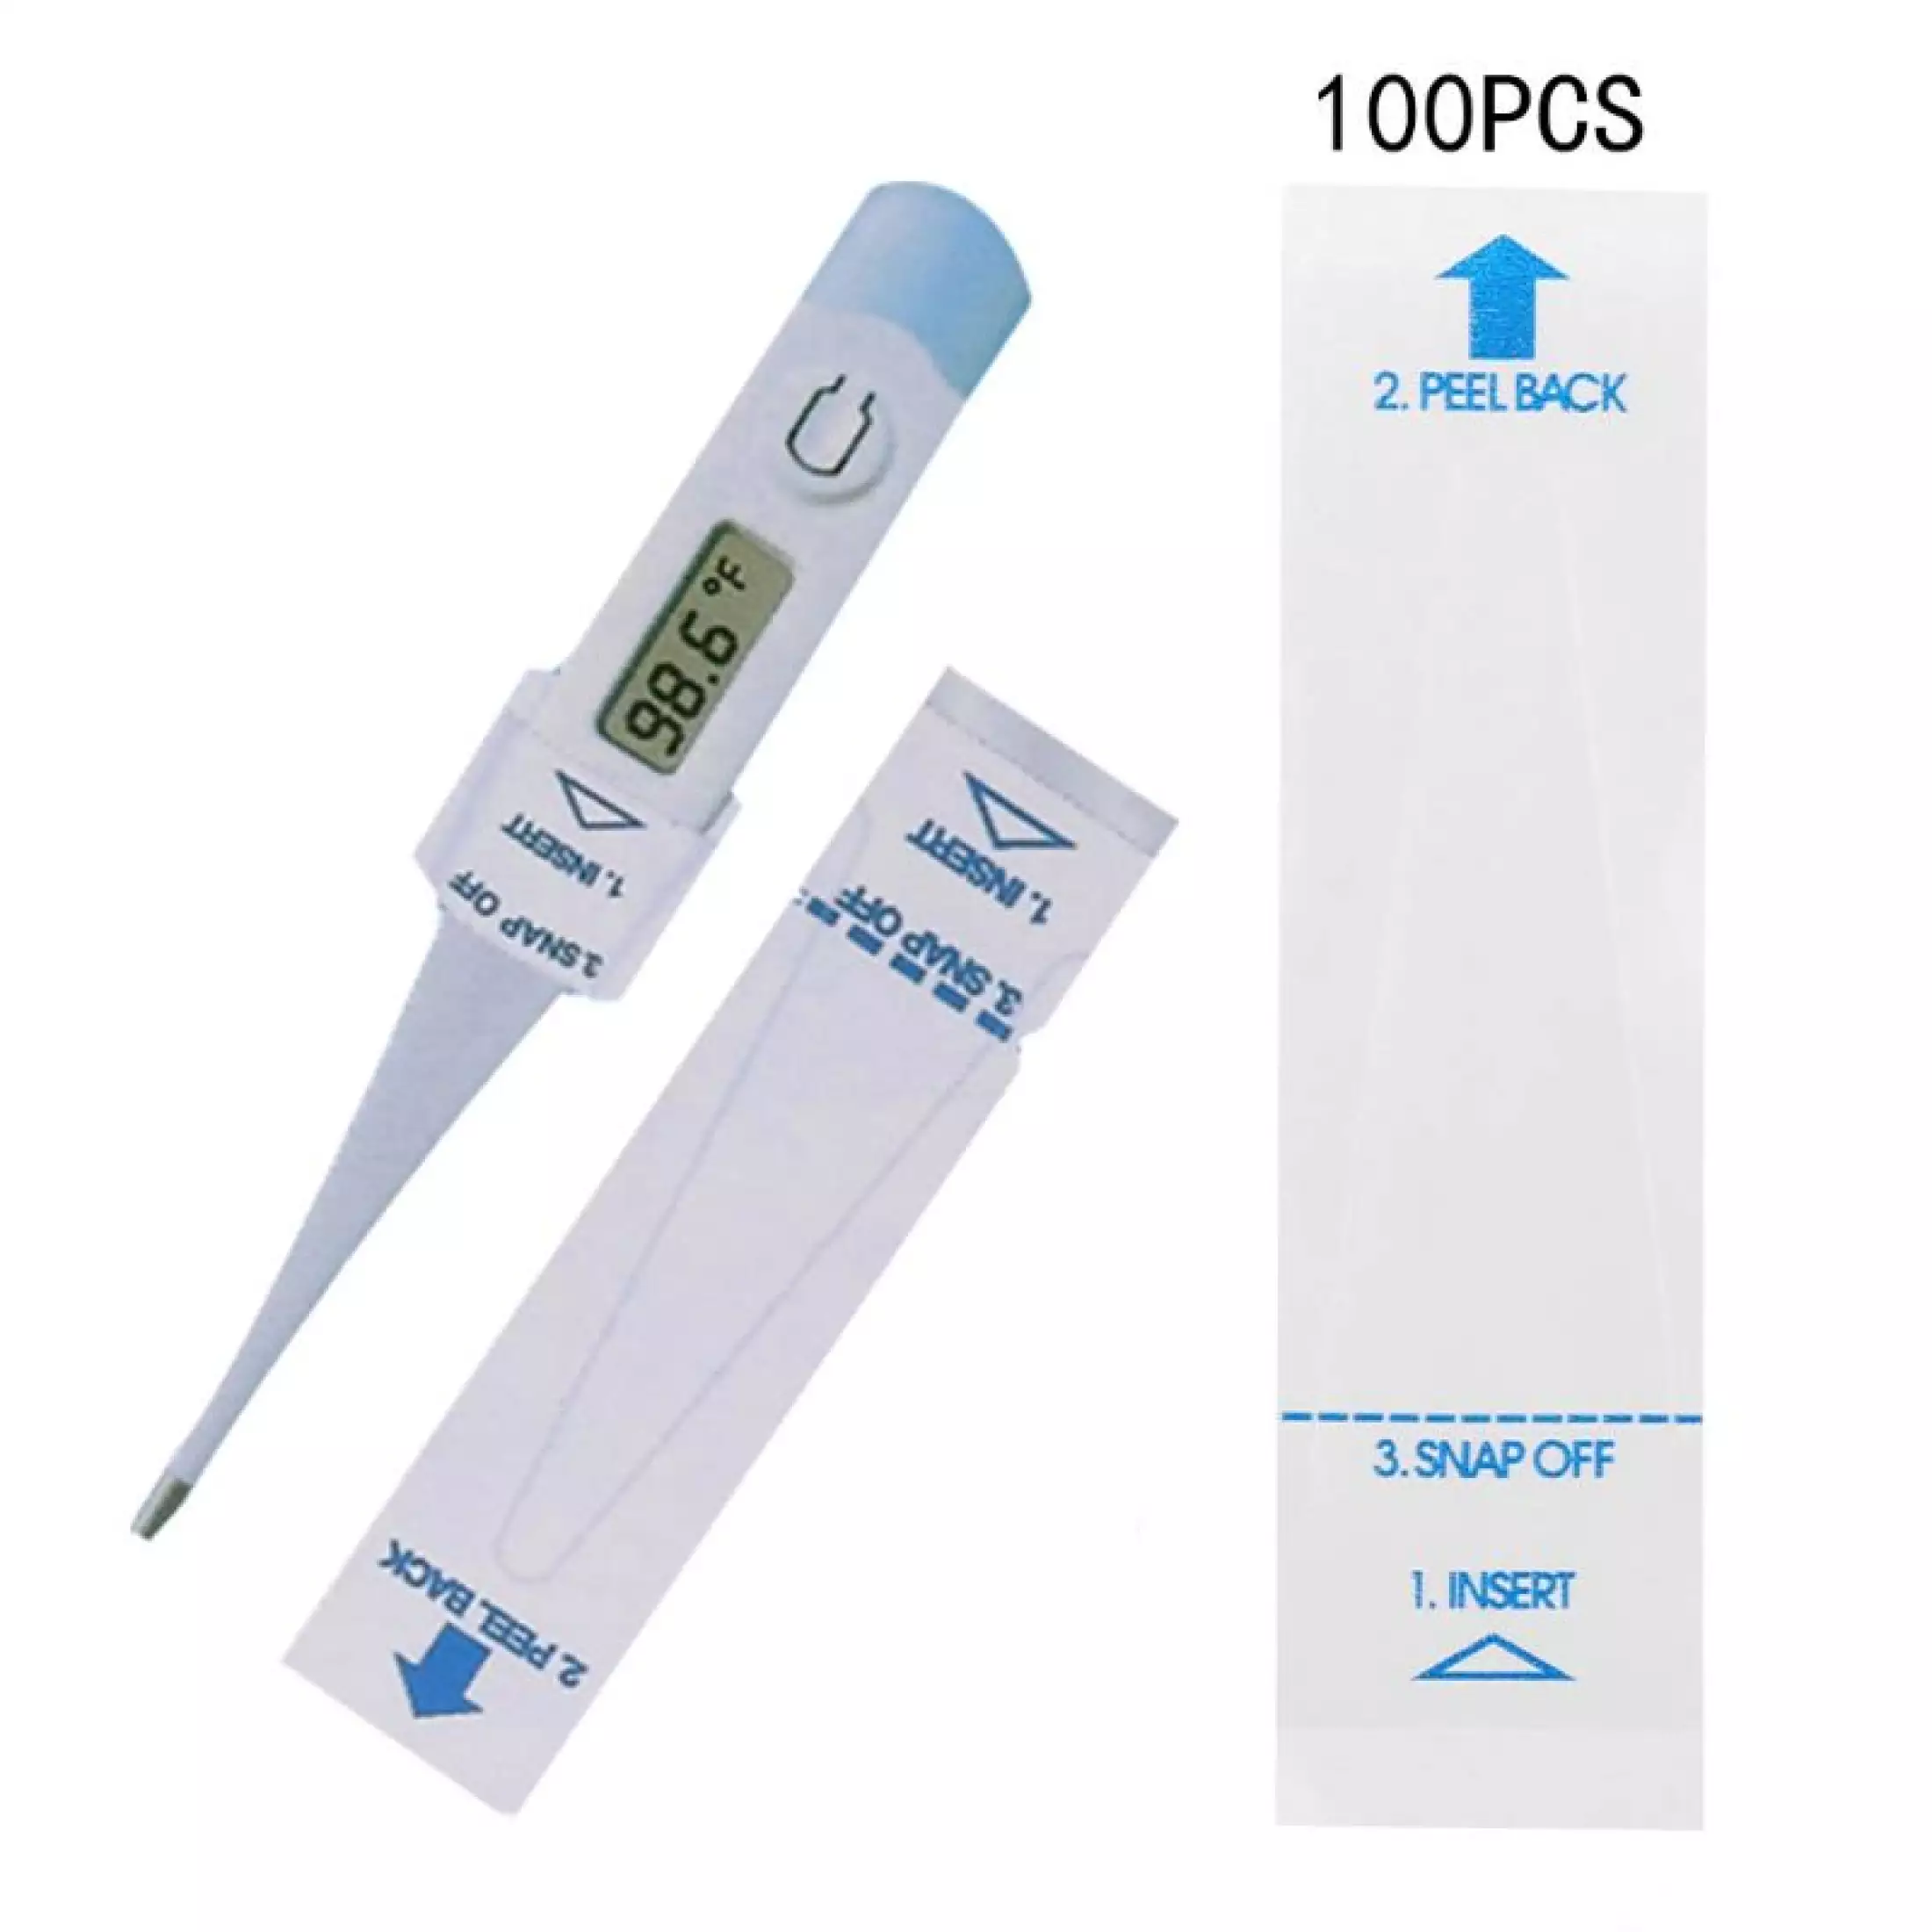 EFINNY 100 Pack Digital Thermometer Probe Covers,Universal Universal Electronic Electronic Rectal Rectal 